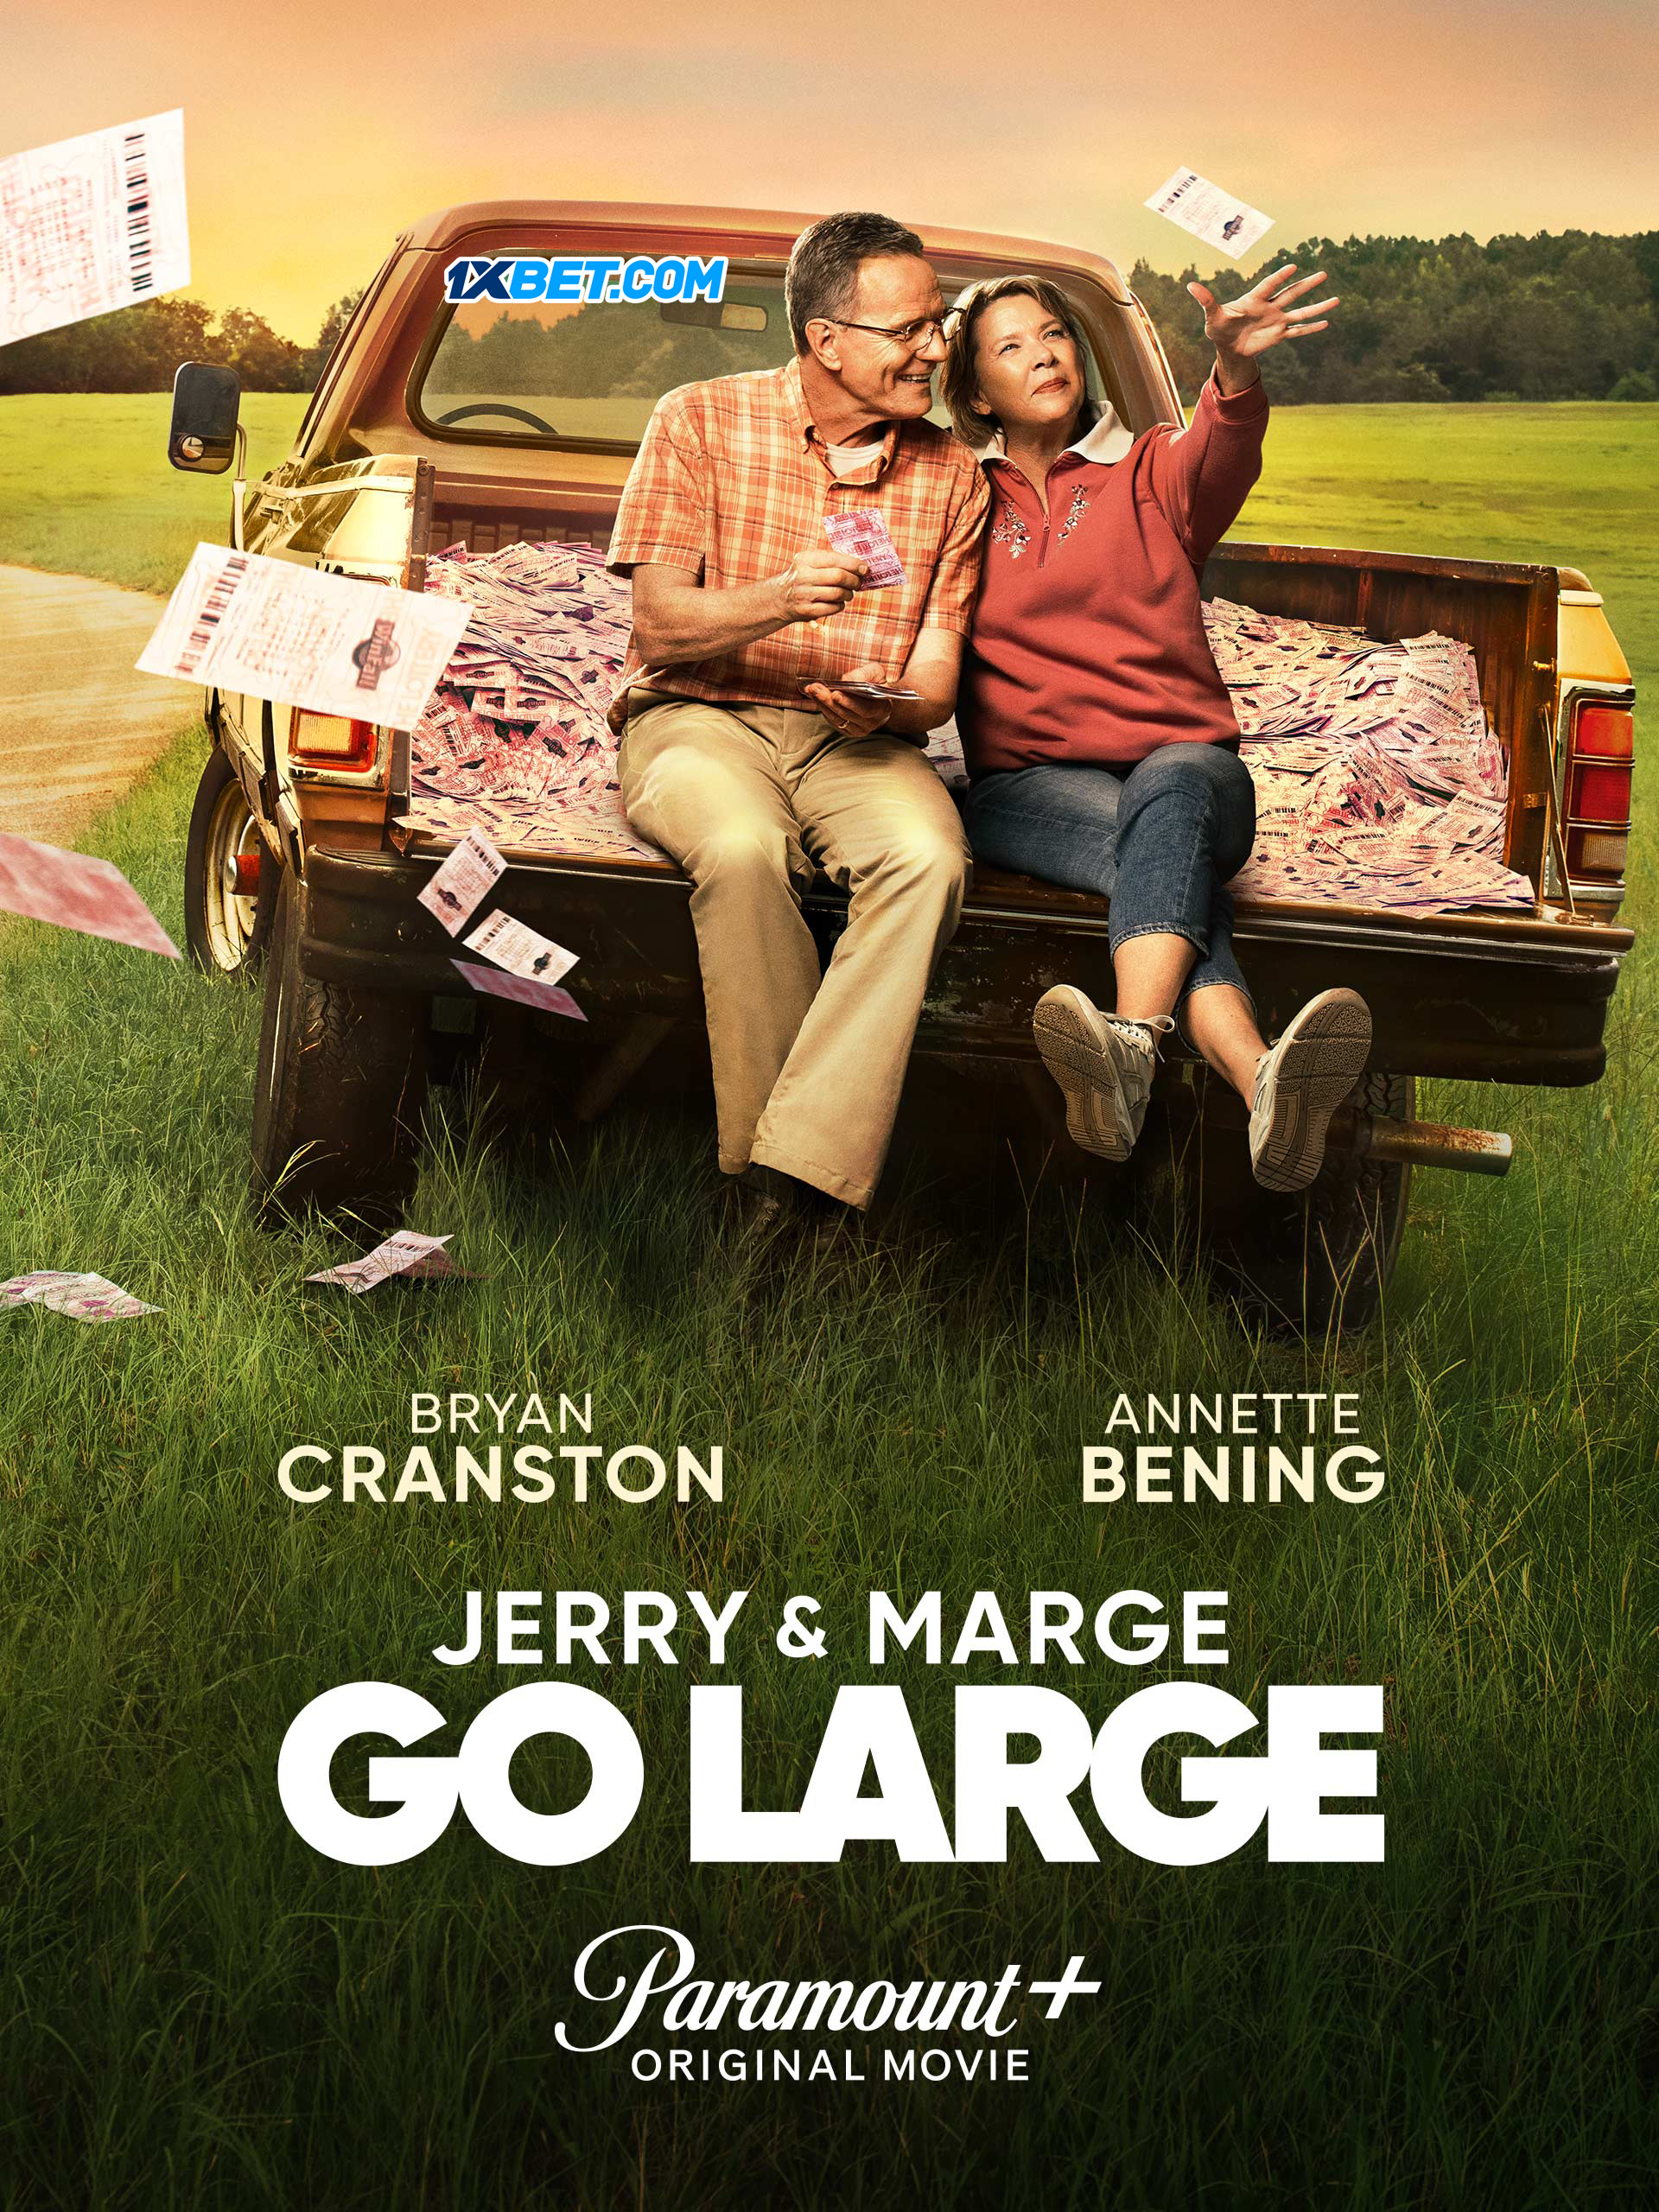 Jerry and Marge Go Large (2022) Bengali Dubbed (VO) [1XBET] 720p WEBRip Online Stream